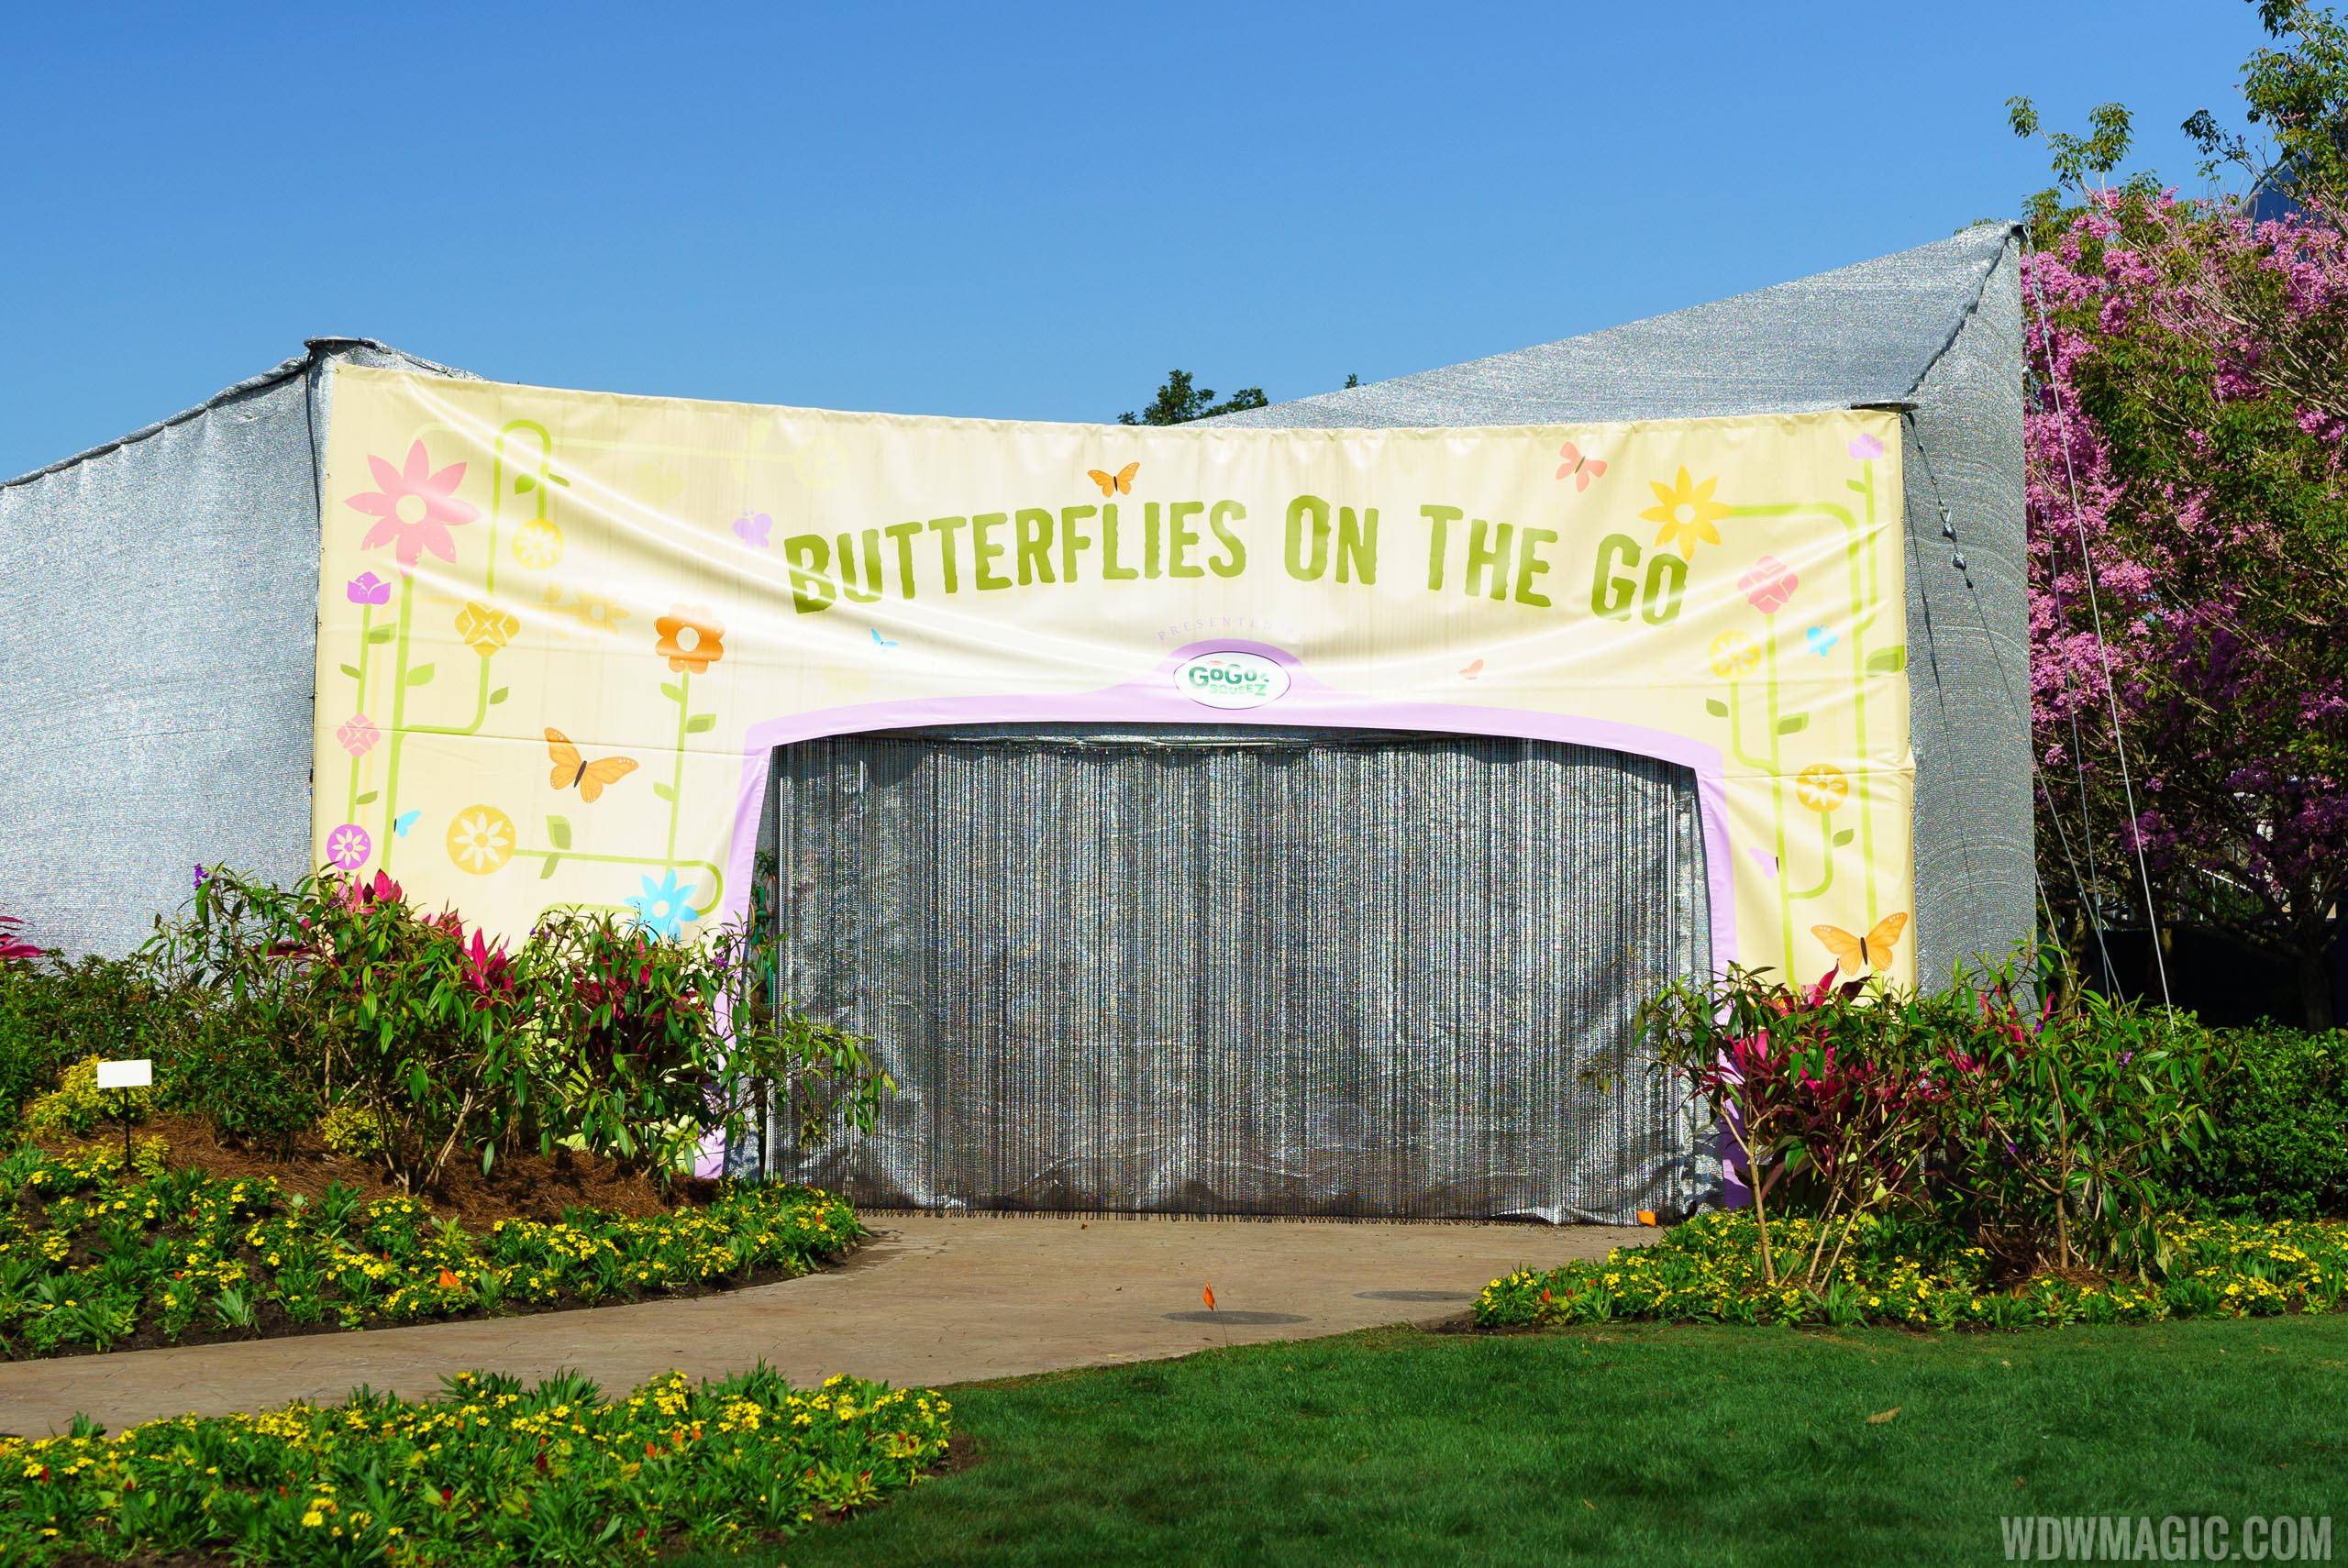 2016 Epcot International Flower and Garden Festival topiary tour